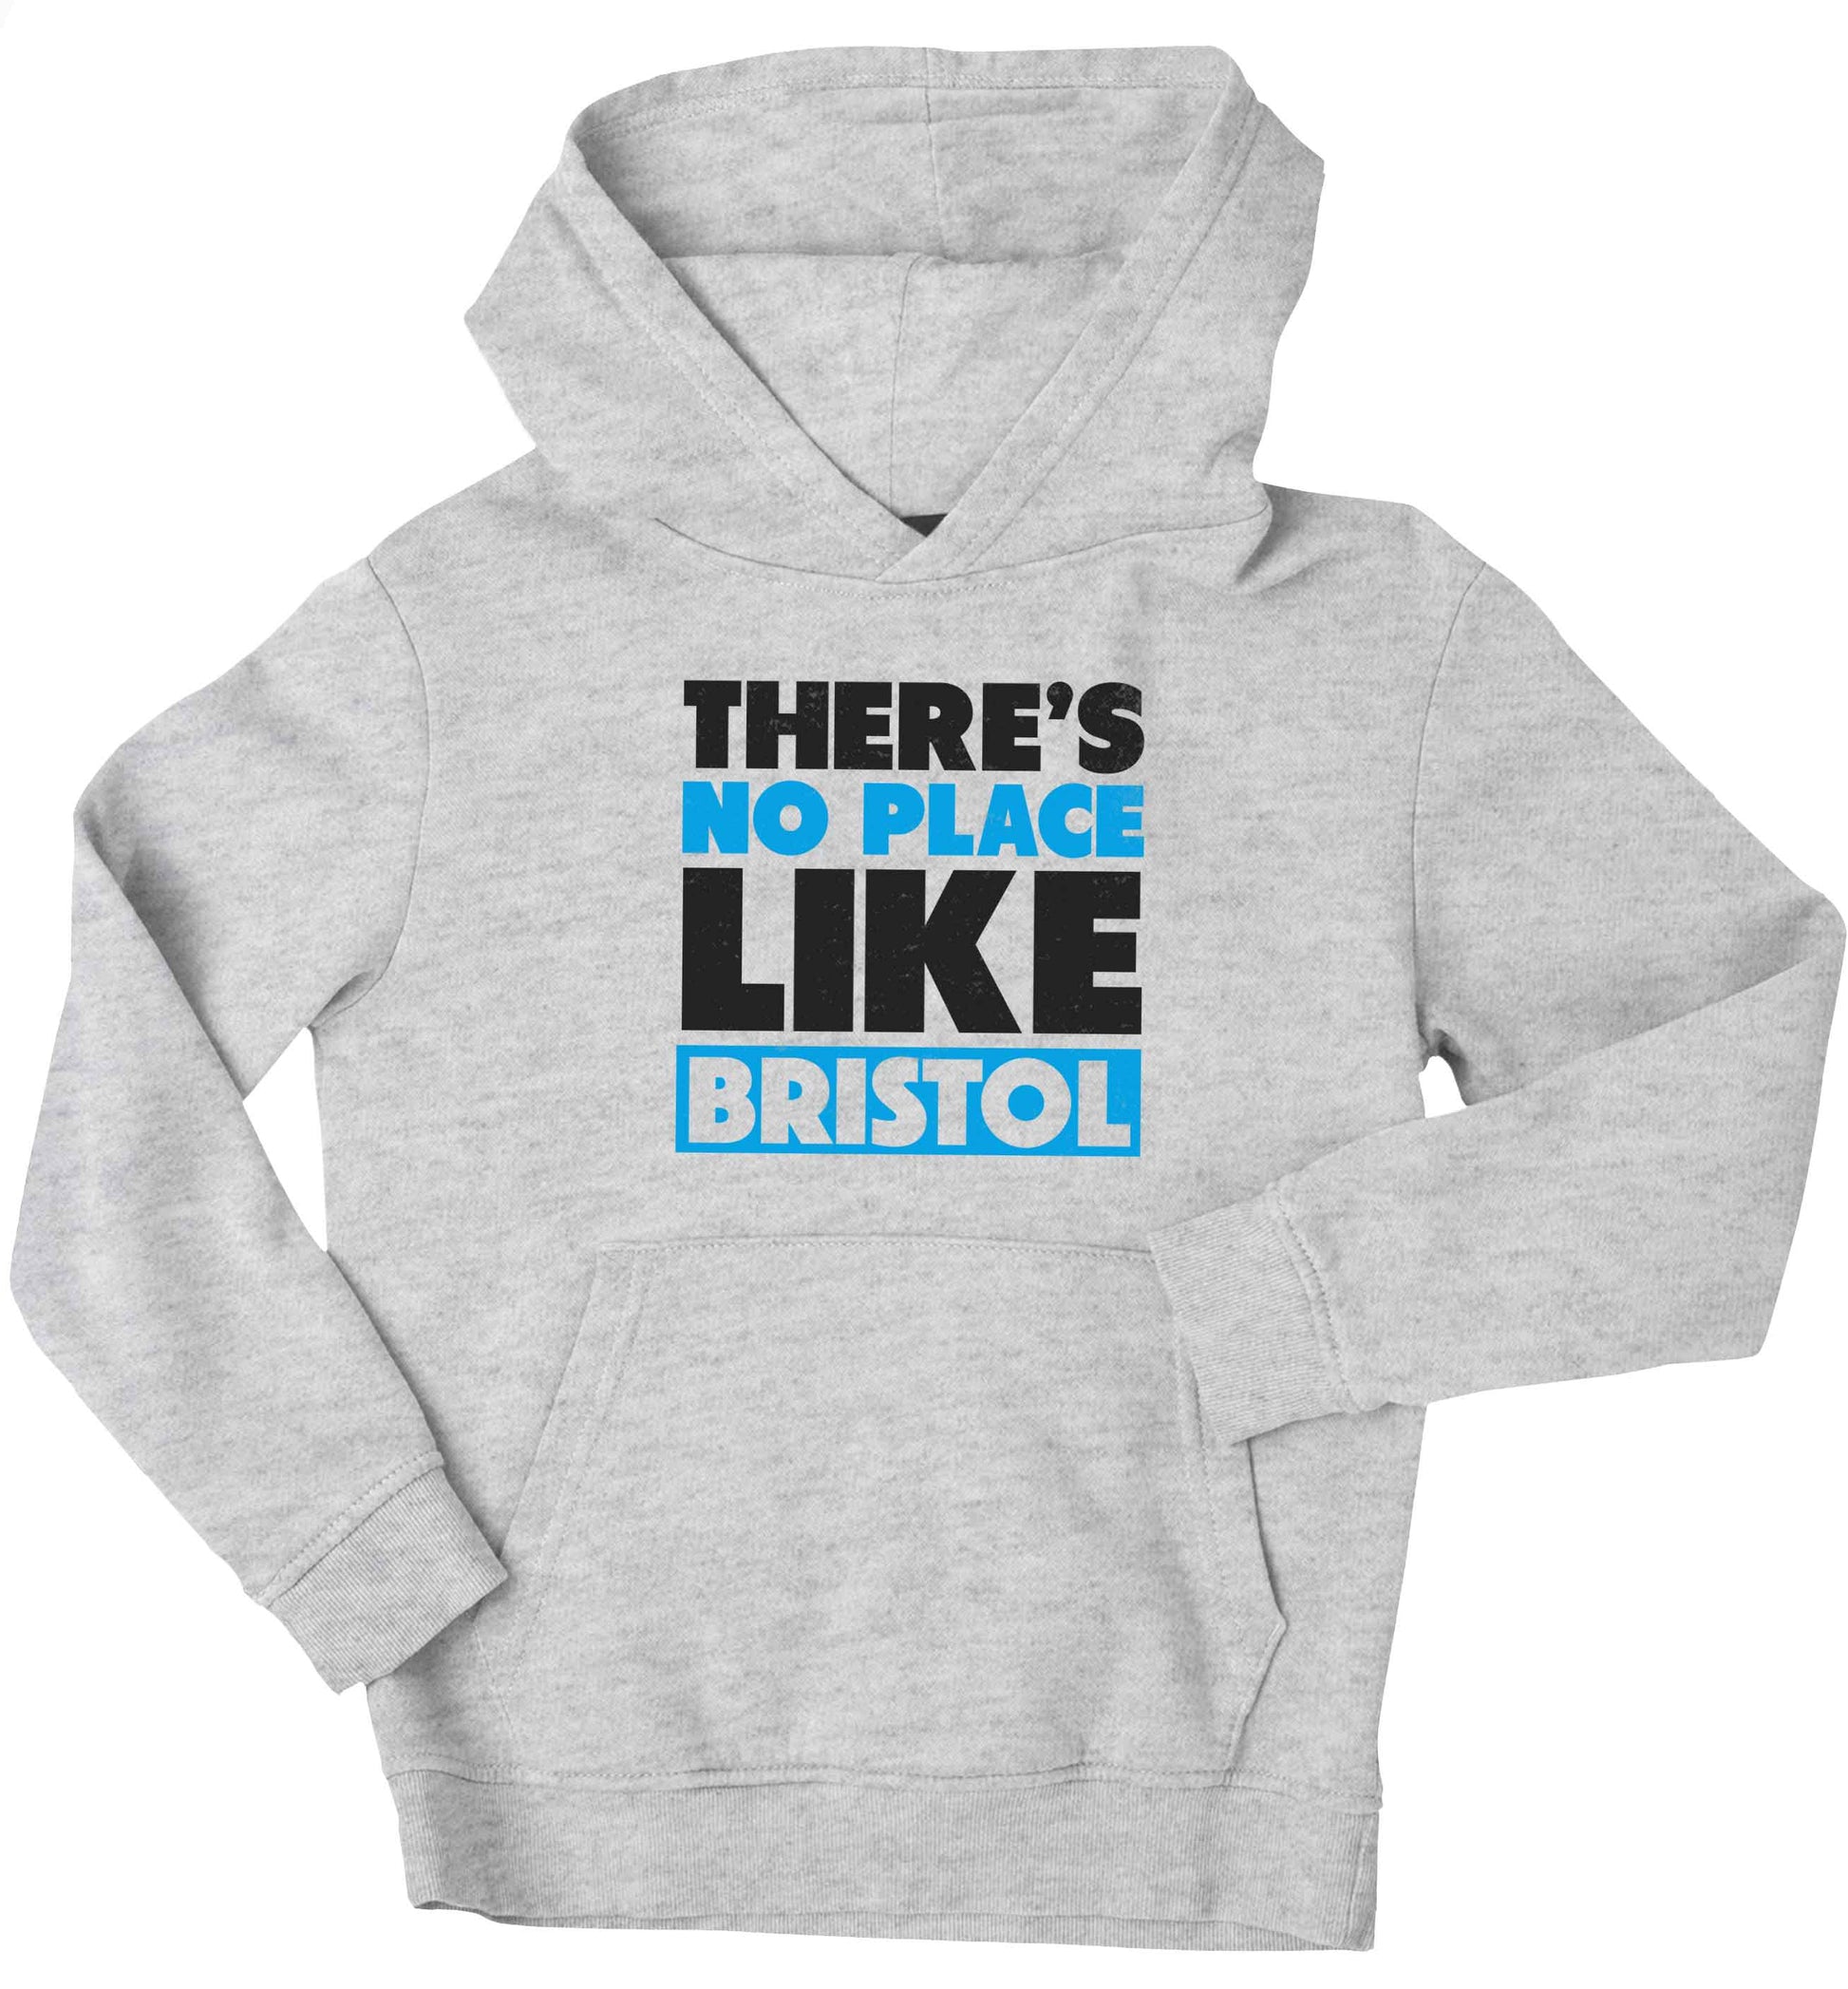 There's no place like Bristol children's grey hoodie 12-13 Years